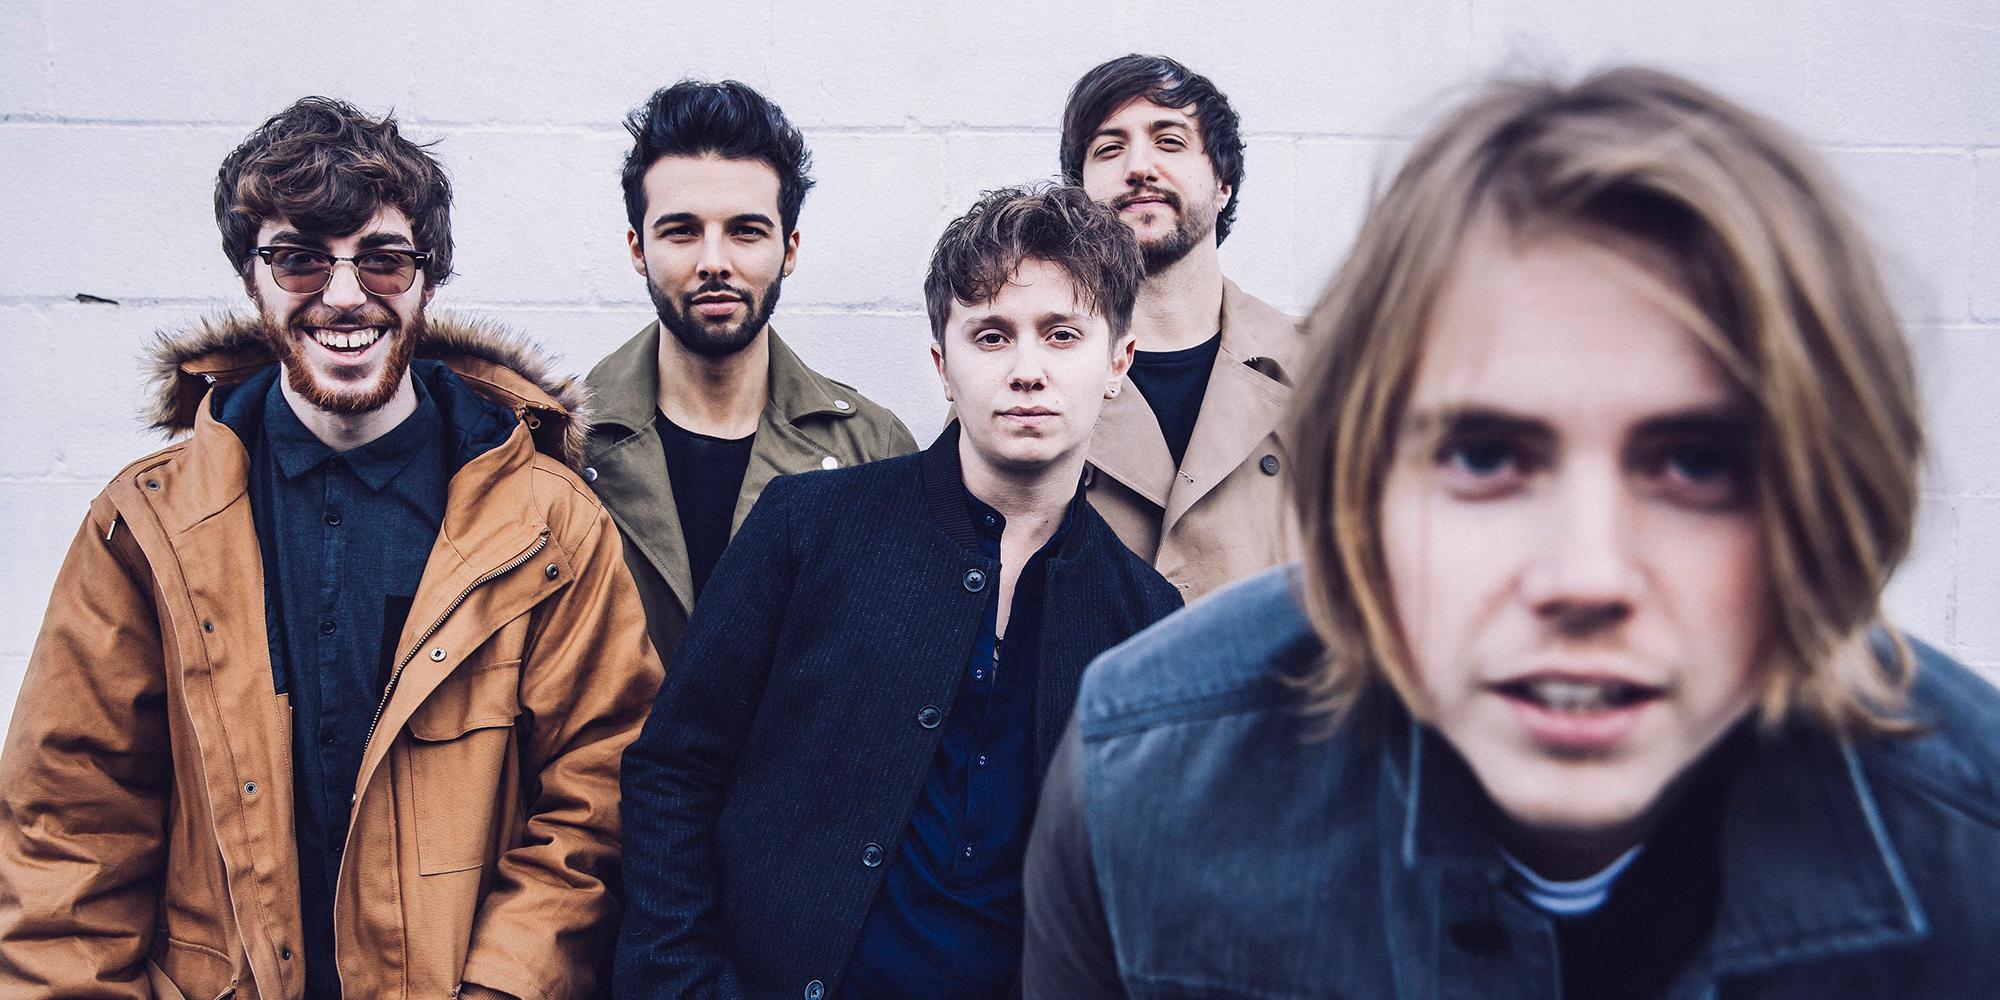 THE VERY COMPANY Presents Nothing But Thieves Live in Bangkok